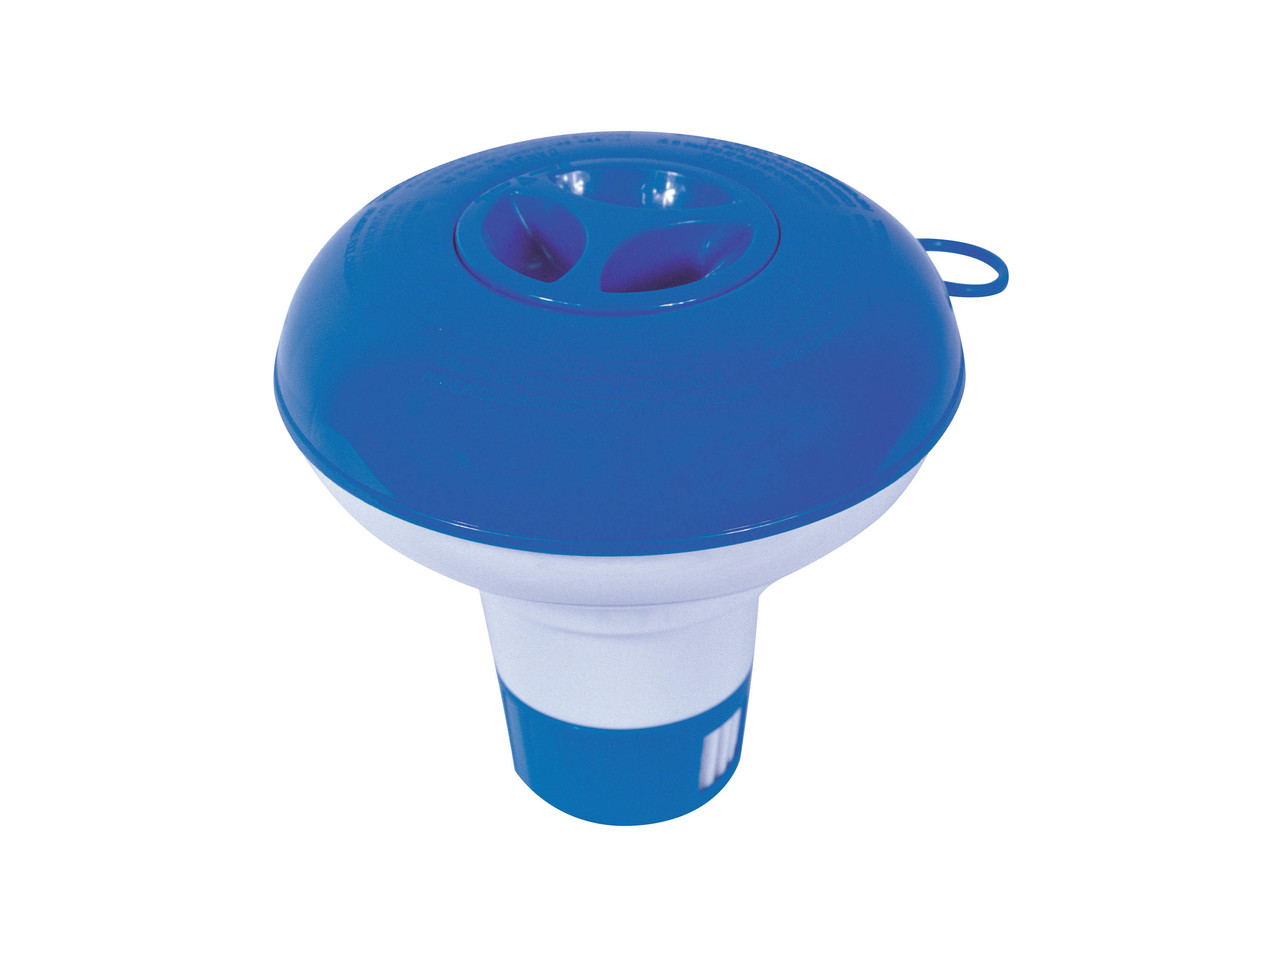 BESTWAY Steel Pro Swimming Pool with Filter Pump